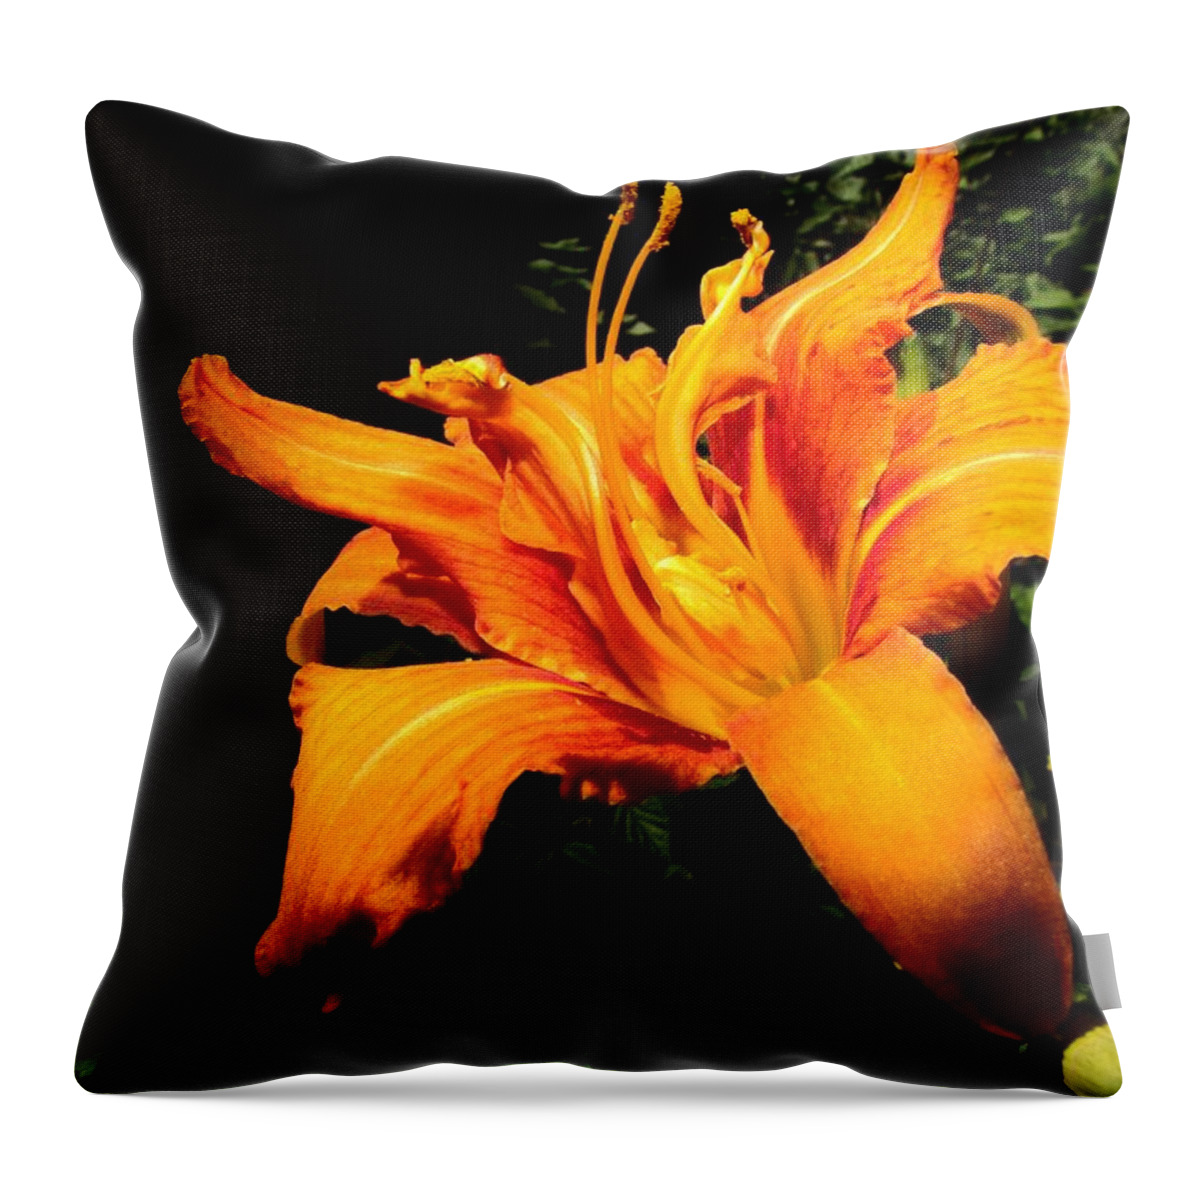 Daylily Throw Pillow featuring the photograph Daylily by Eric Noa